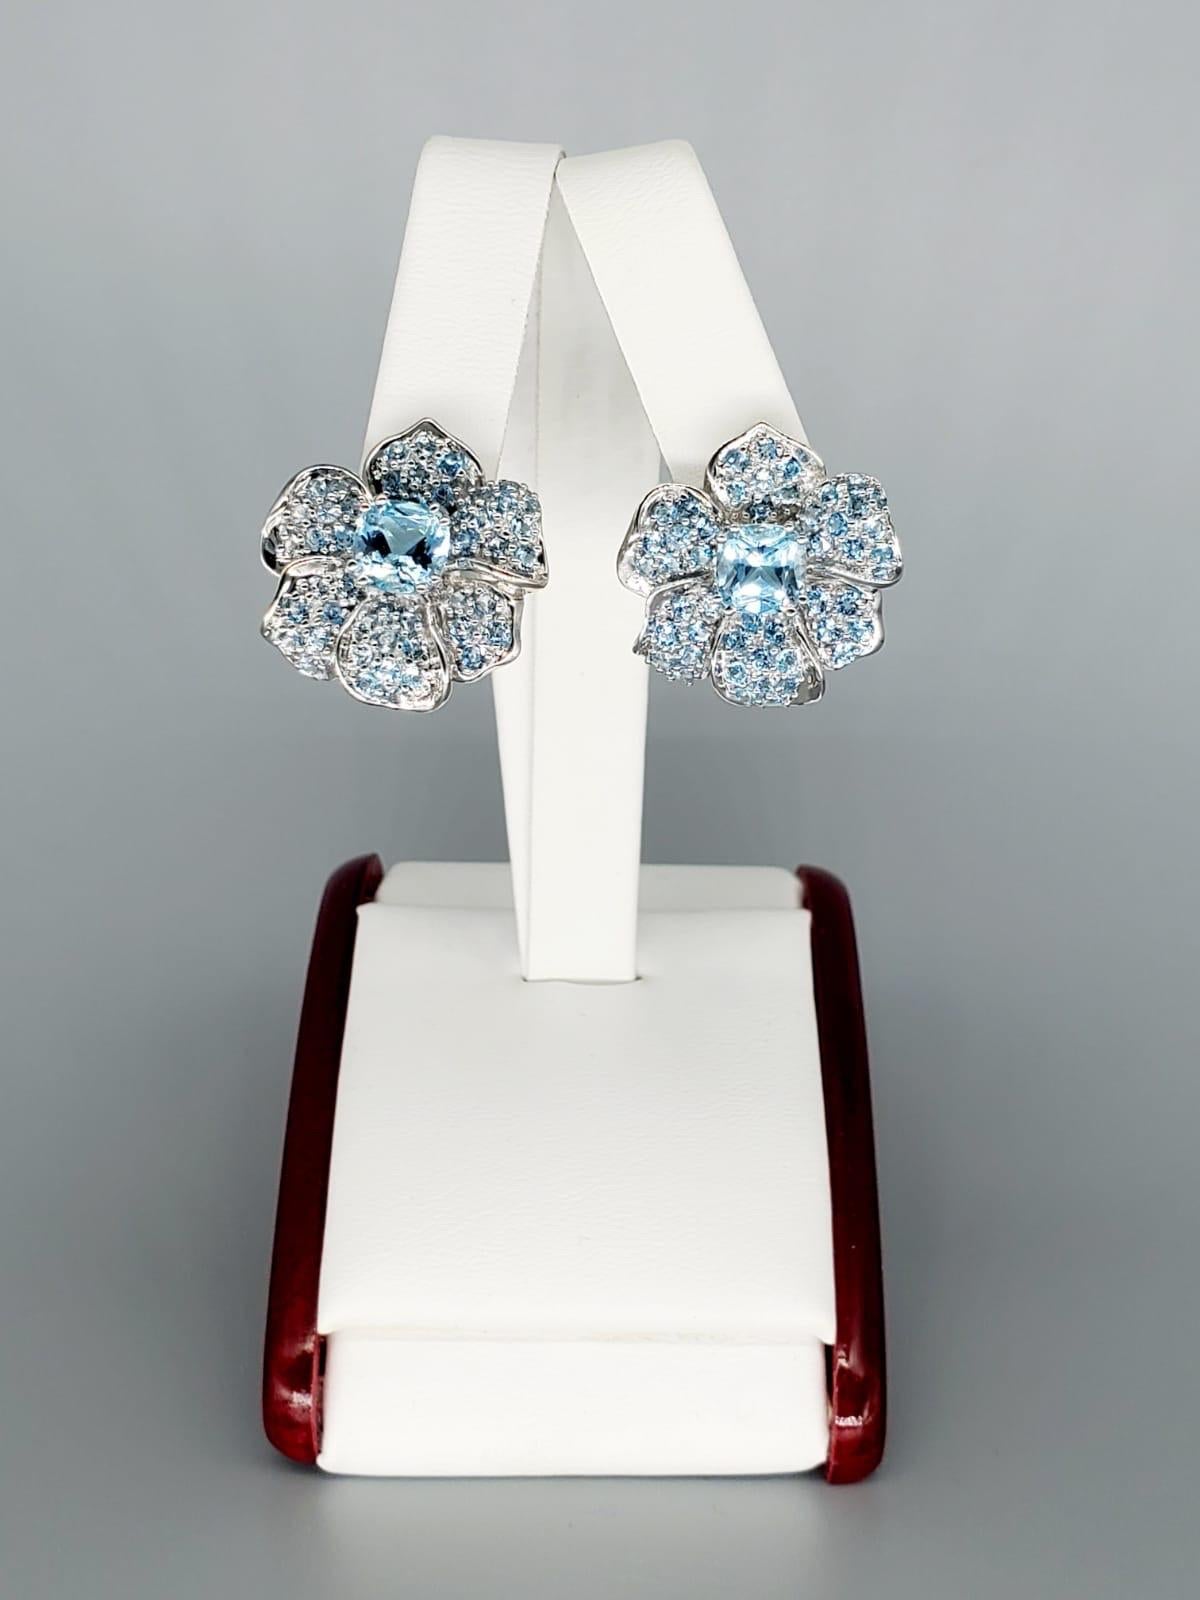 Vintage 9 Carats Aquamarine Flower Cluster Clip Earrings. The earrings are extremely beautiful and are very large with the diameter of 22mm. The craftsmanship is superb and features solid 14k white gold with perfect stone setting for the gems. The